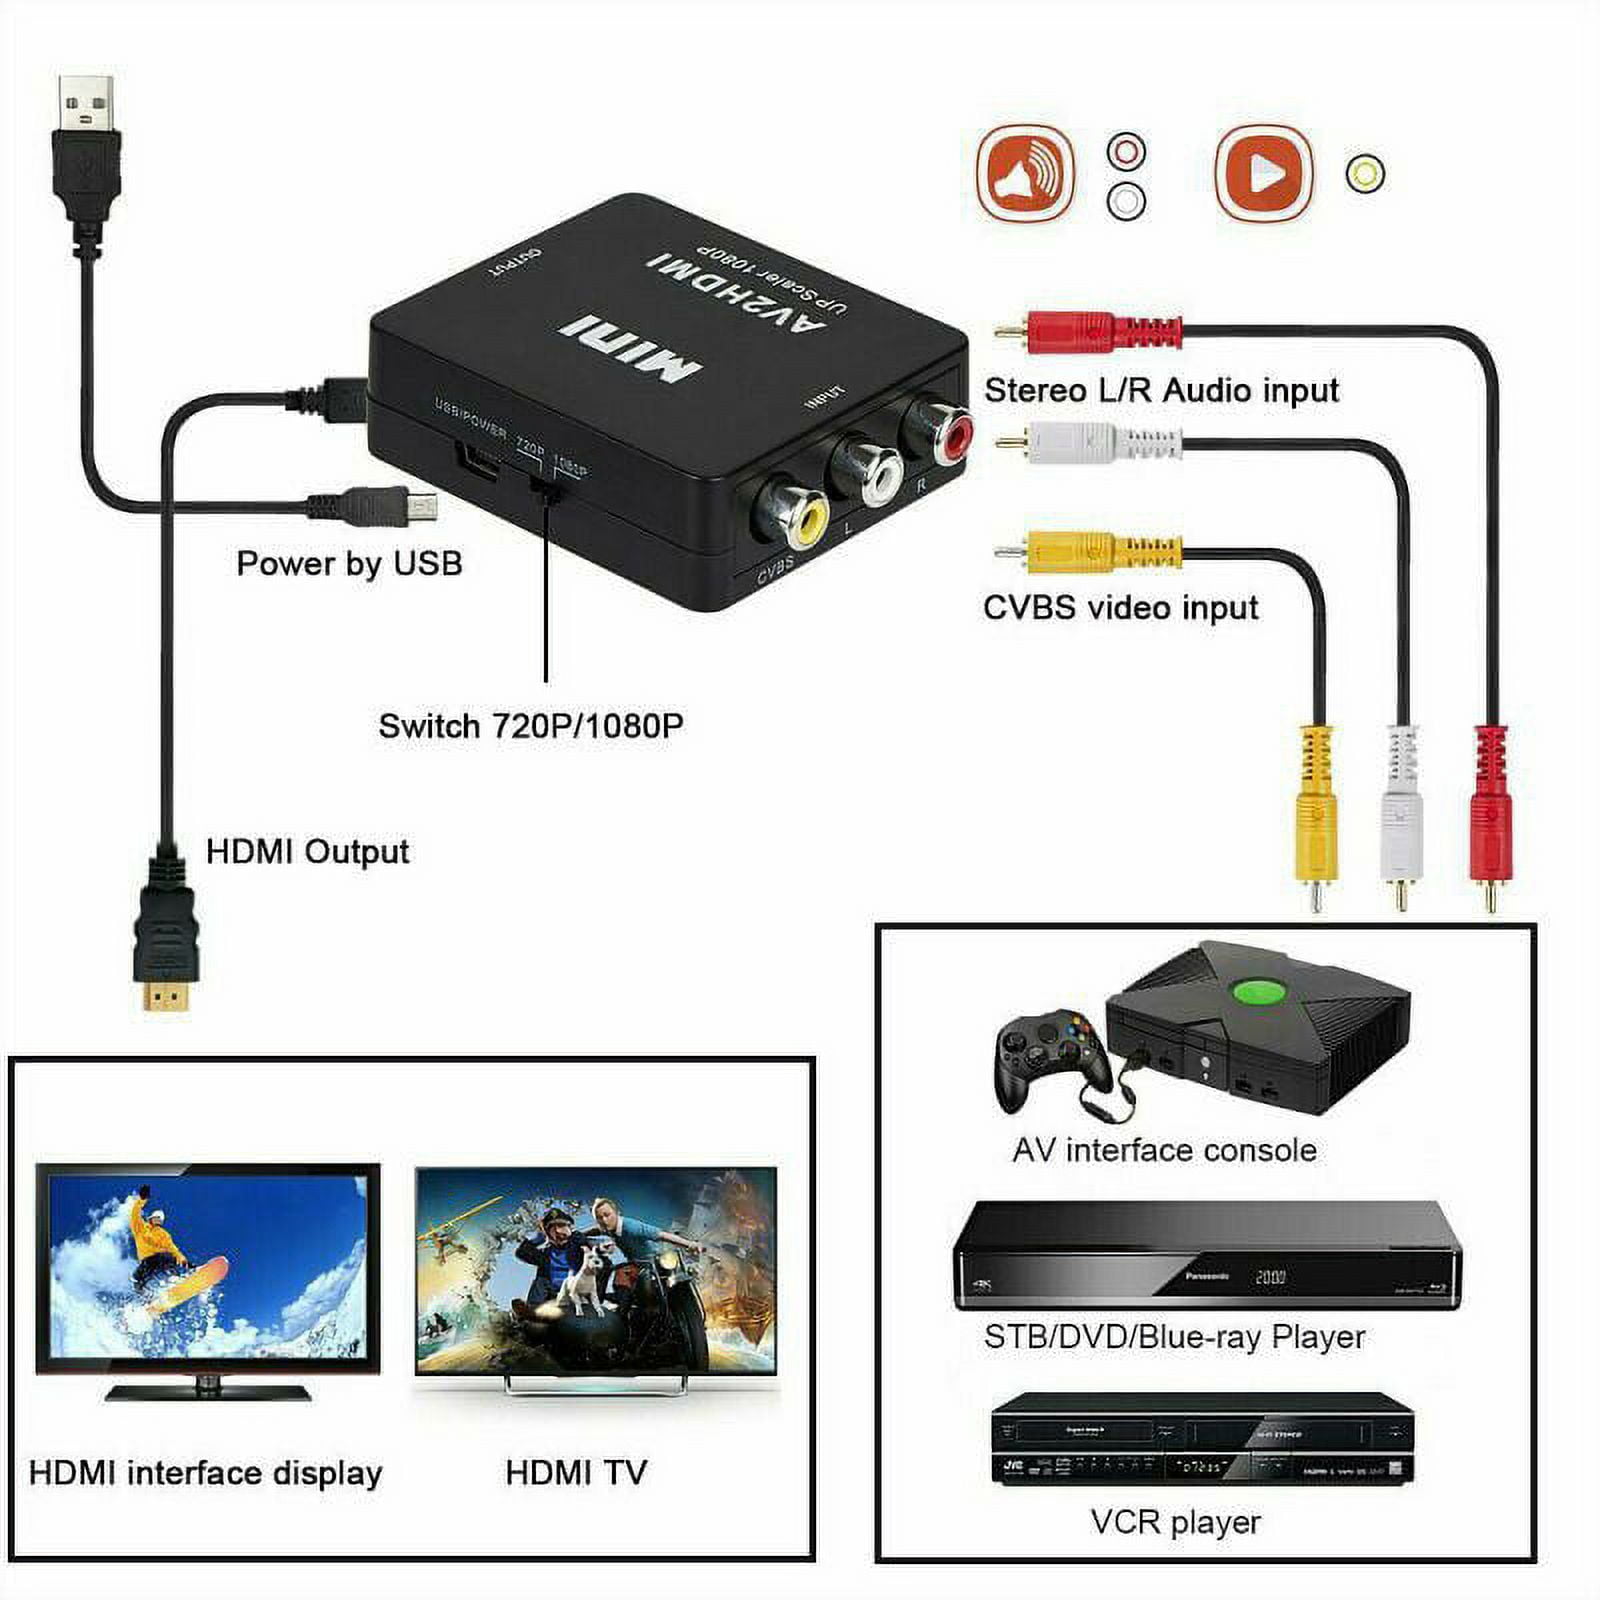 Dingsun 2 Port RCA to HDMI Converter Dual AV to HDMI Adapter, Supports  16:9/4:3, Compatible with WII, N64, PS2, VHS, VCR DVD Players, TV and  Projector